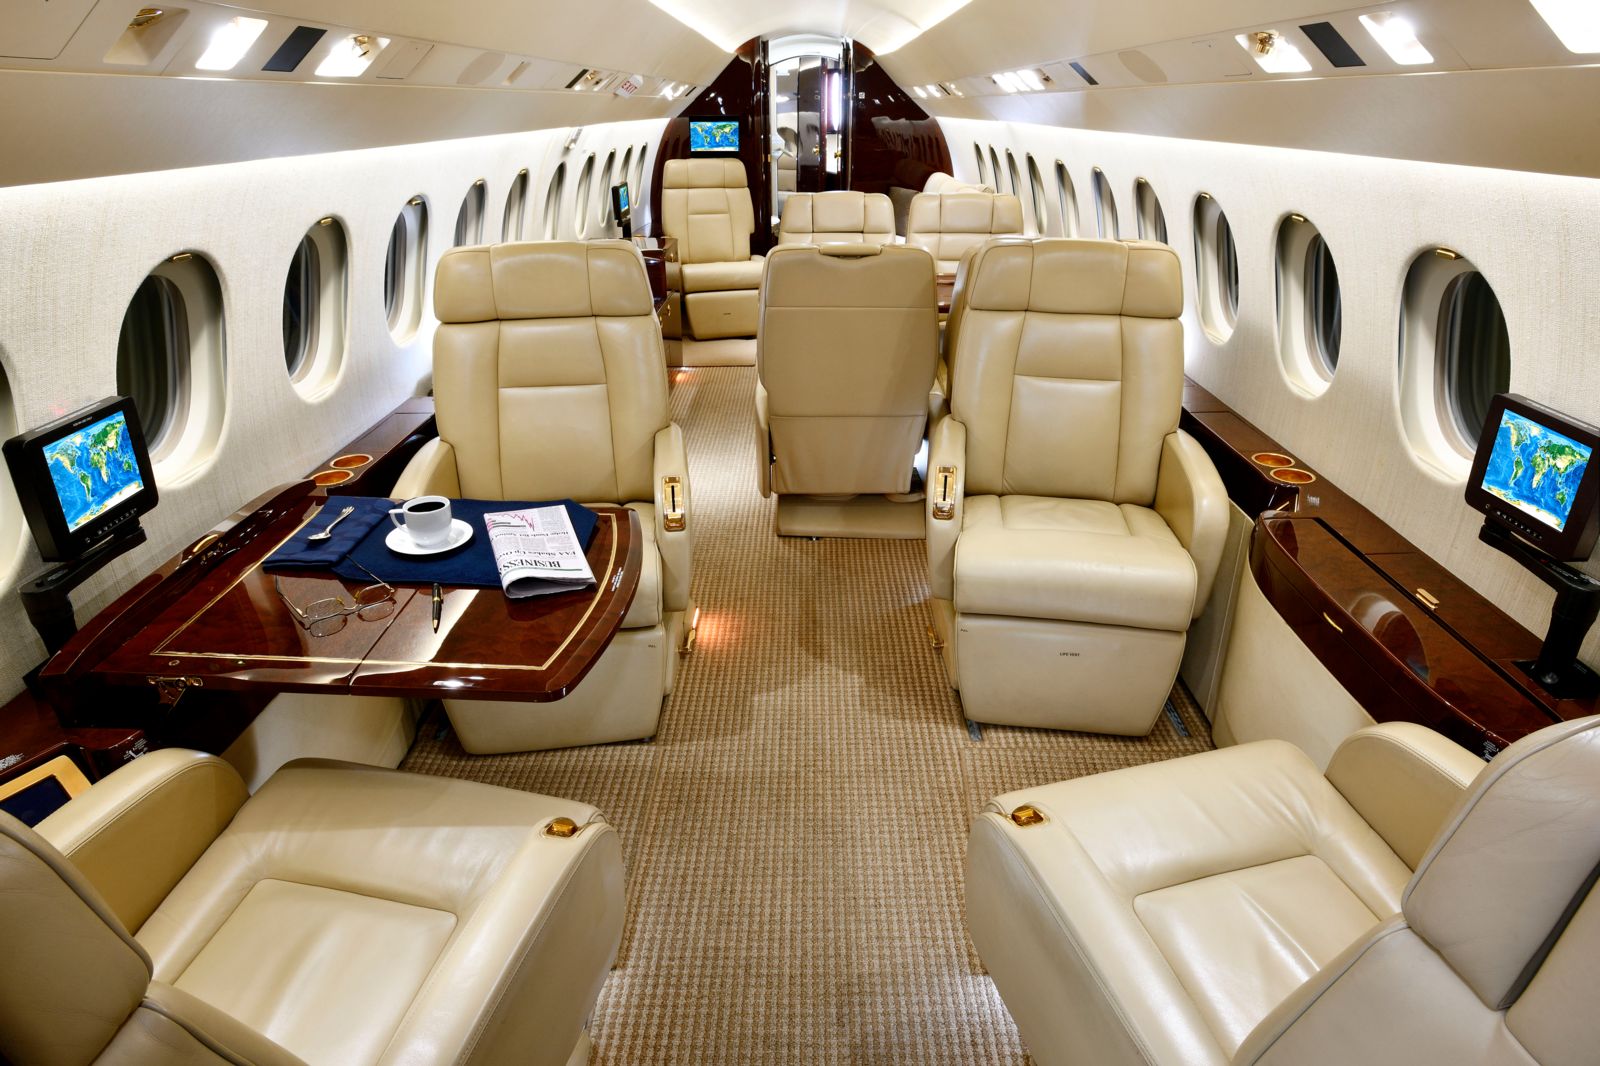 Dassault Falcon 900EX EASy  S/N 229 for sale | gallery image: /userfiles/images/F900EXy_sn229/fwd%20aft.jpg